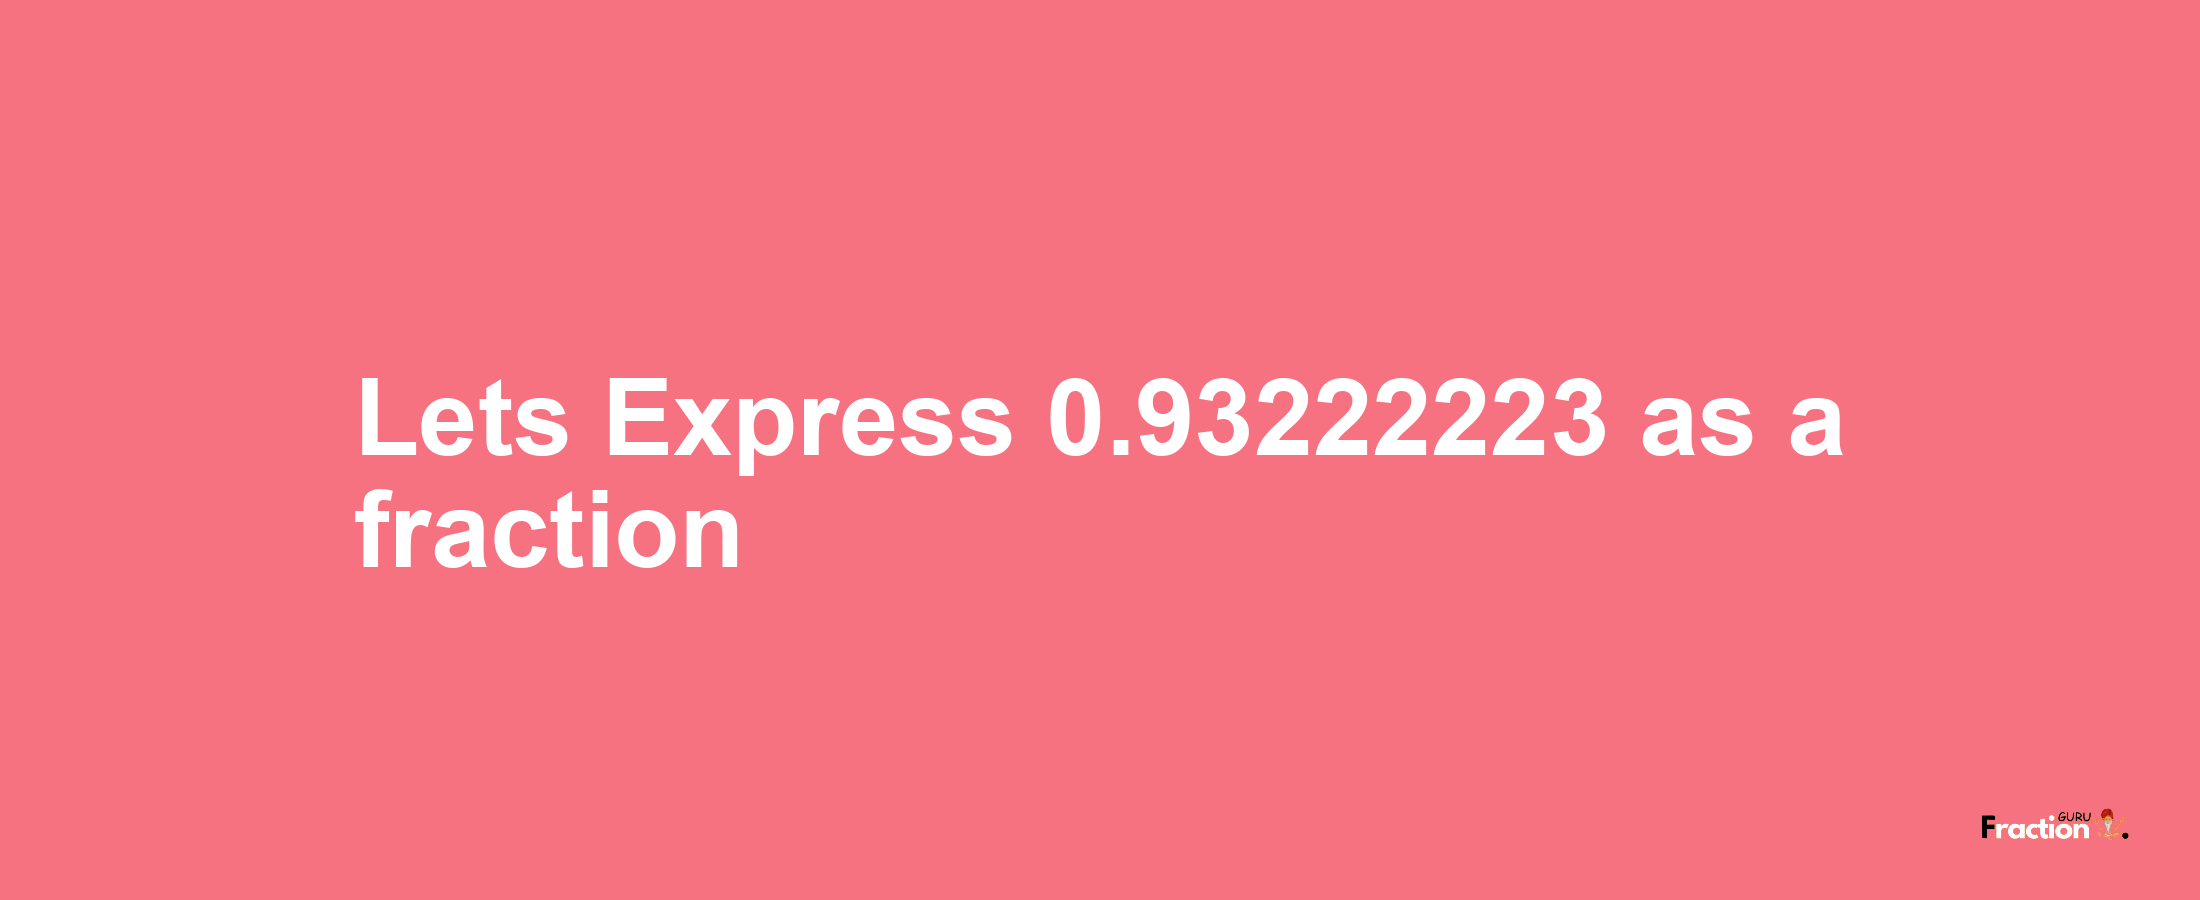 Lets Express 0.93222223 as afraction